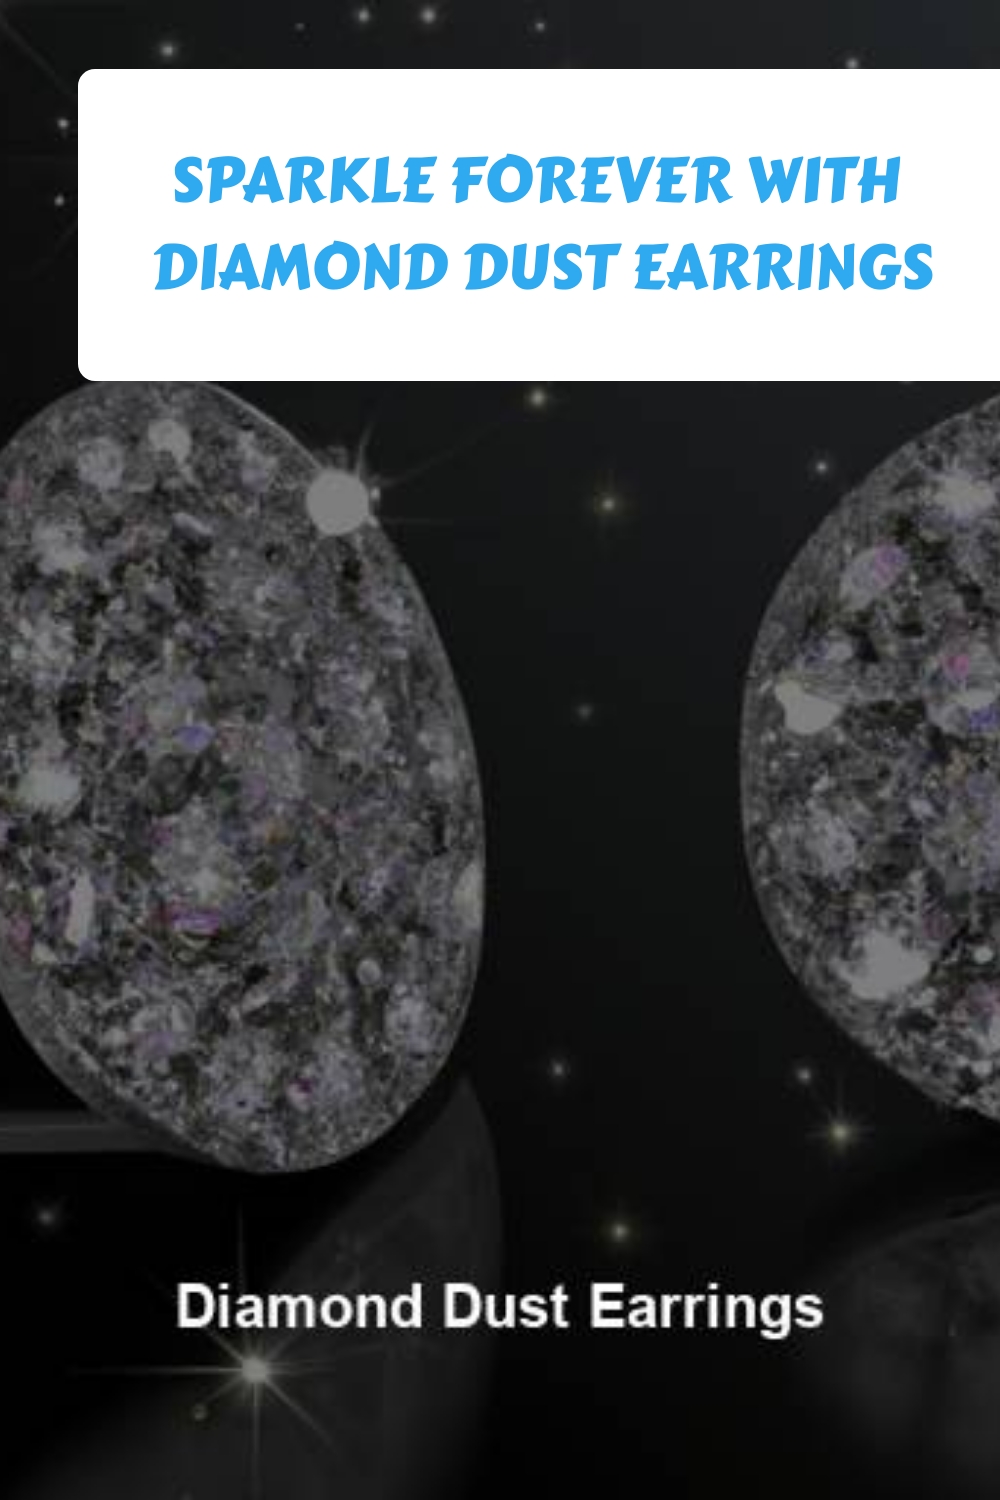 Sparkle Forever With Diamond Dust Earrings Generated Pin 3958